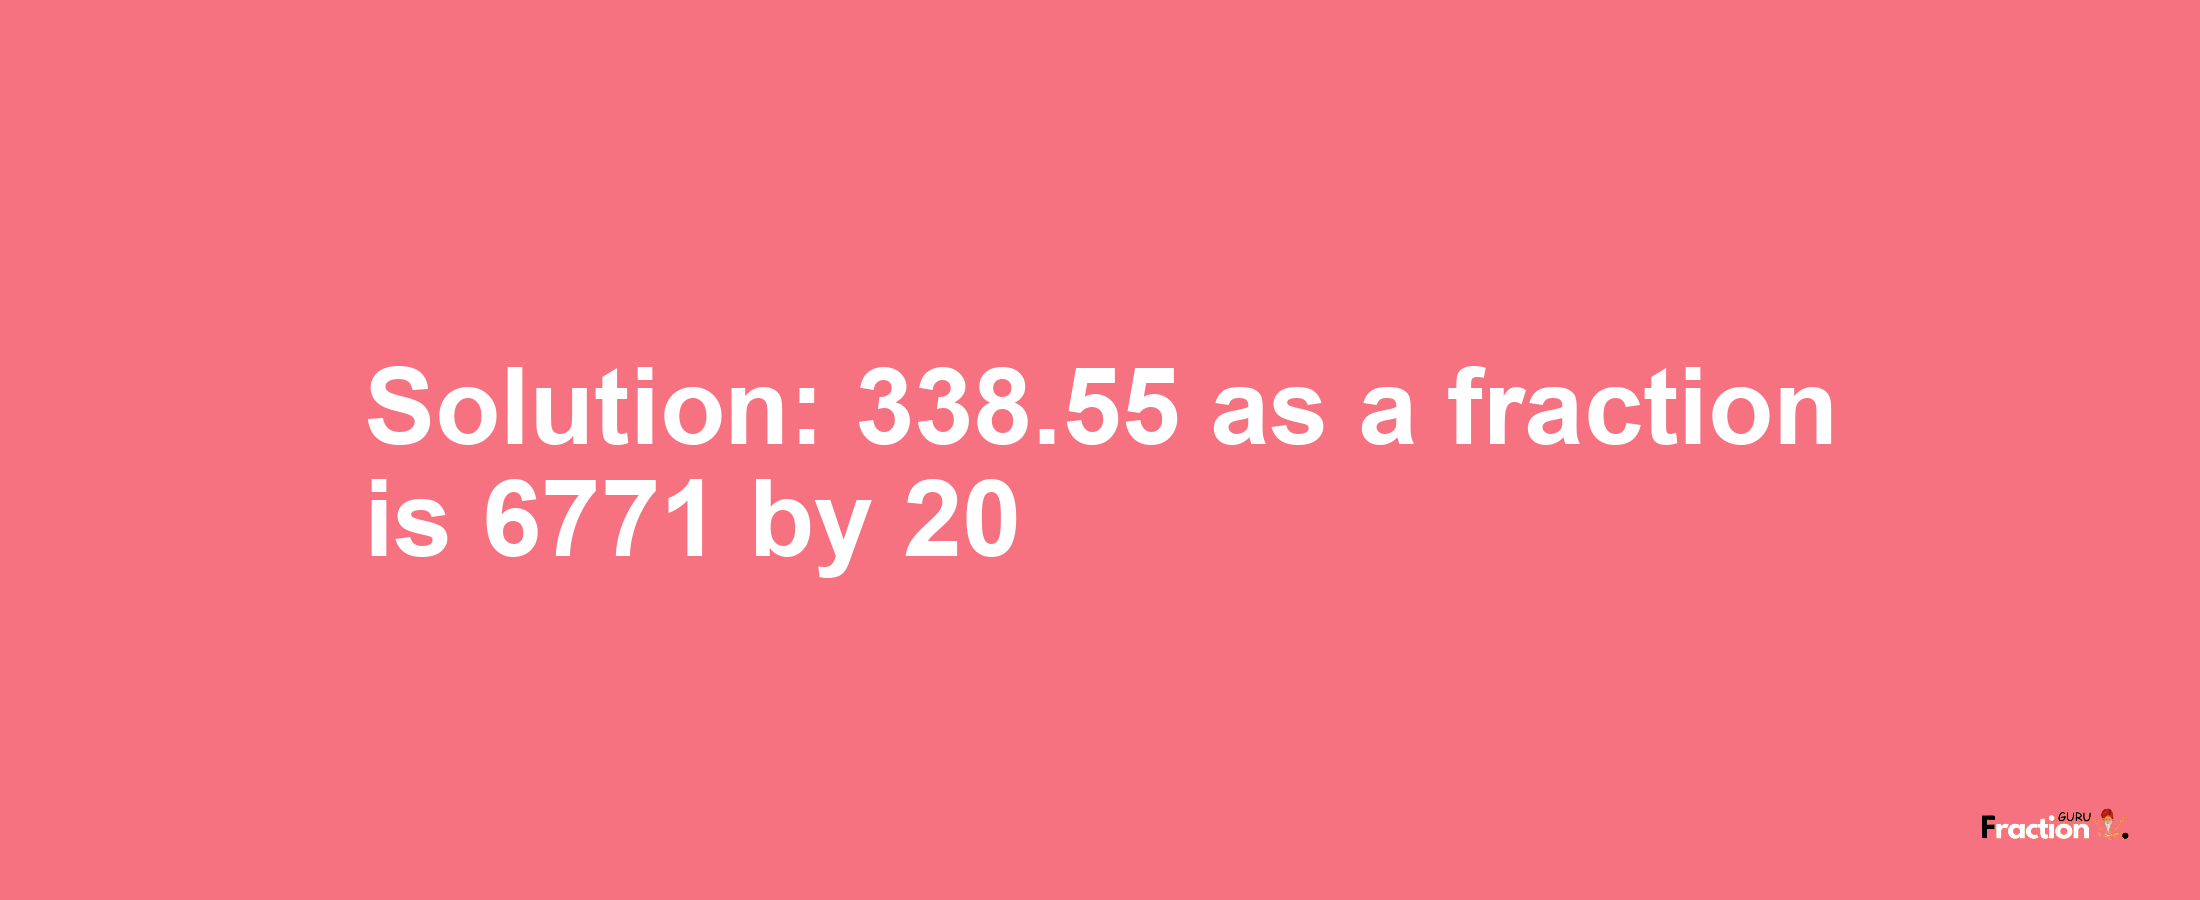 Solution:338.55 as a fraction is 6771/20